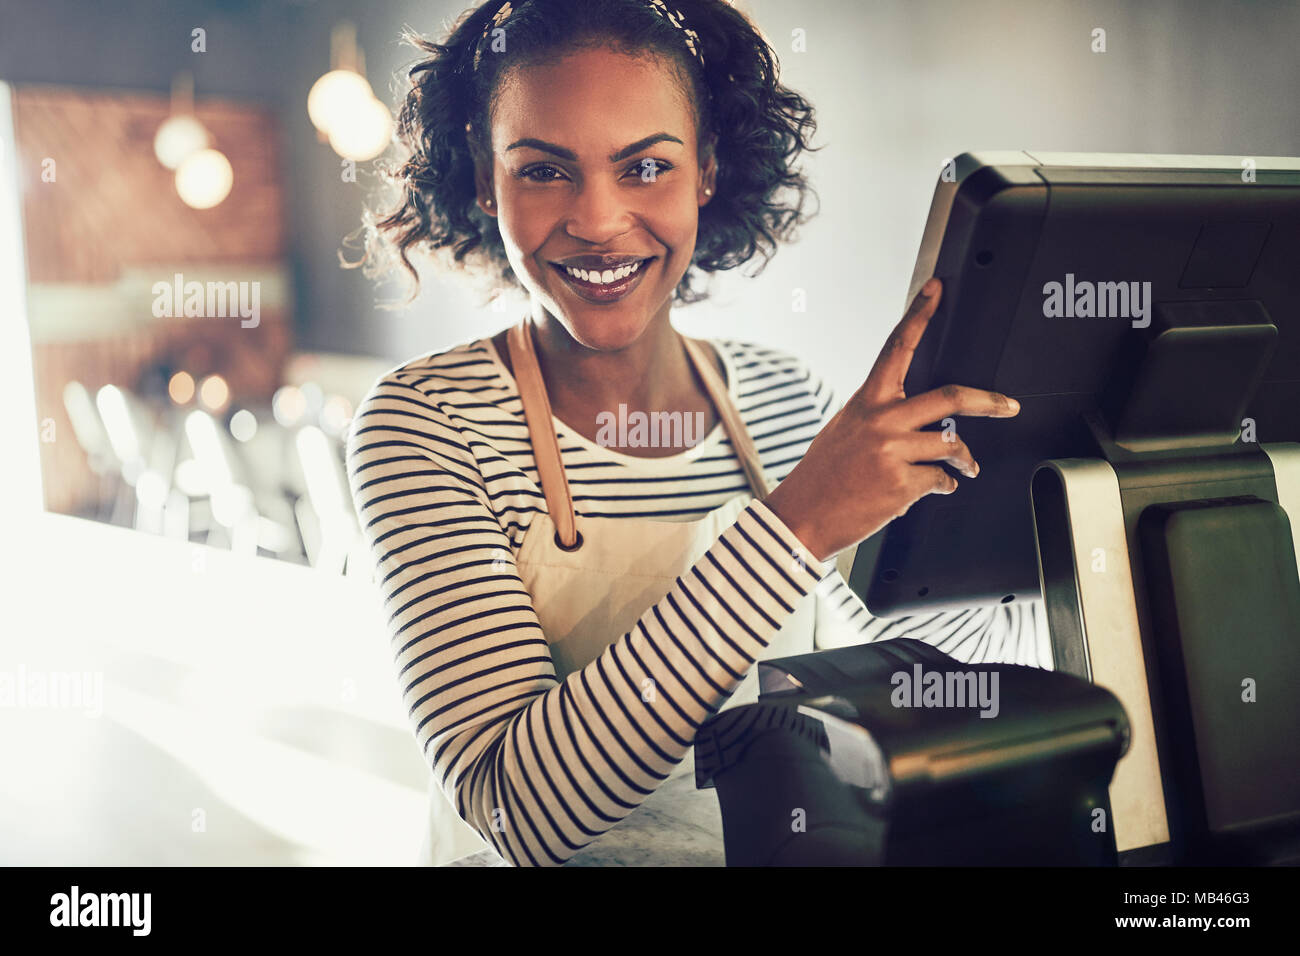 Smiling young African waitress wearing an apron standing by the point of sale terminal of a trendy restaurant Stock Photo